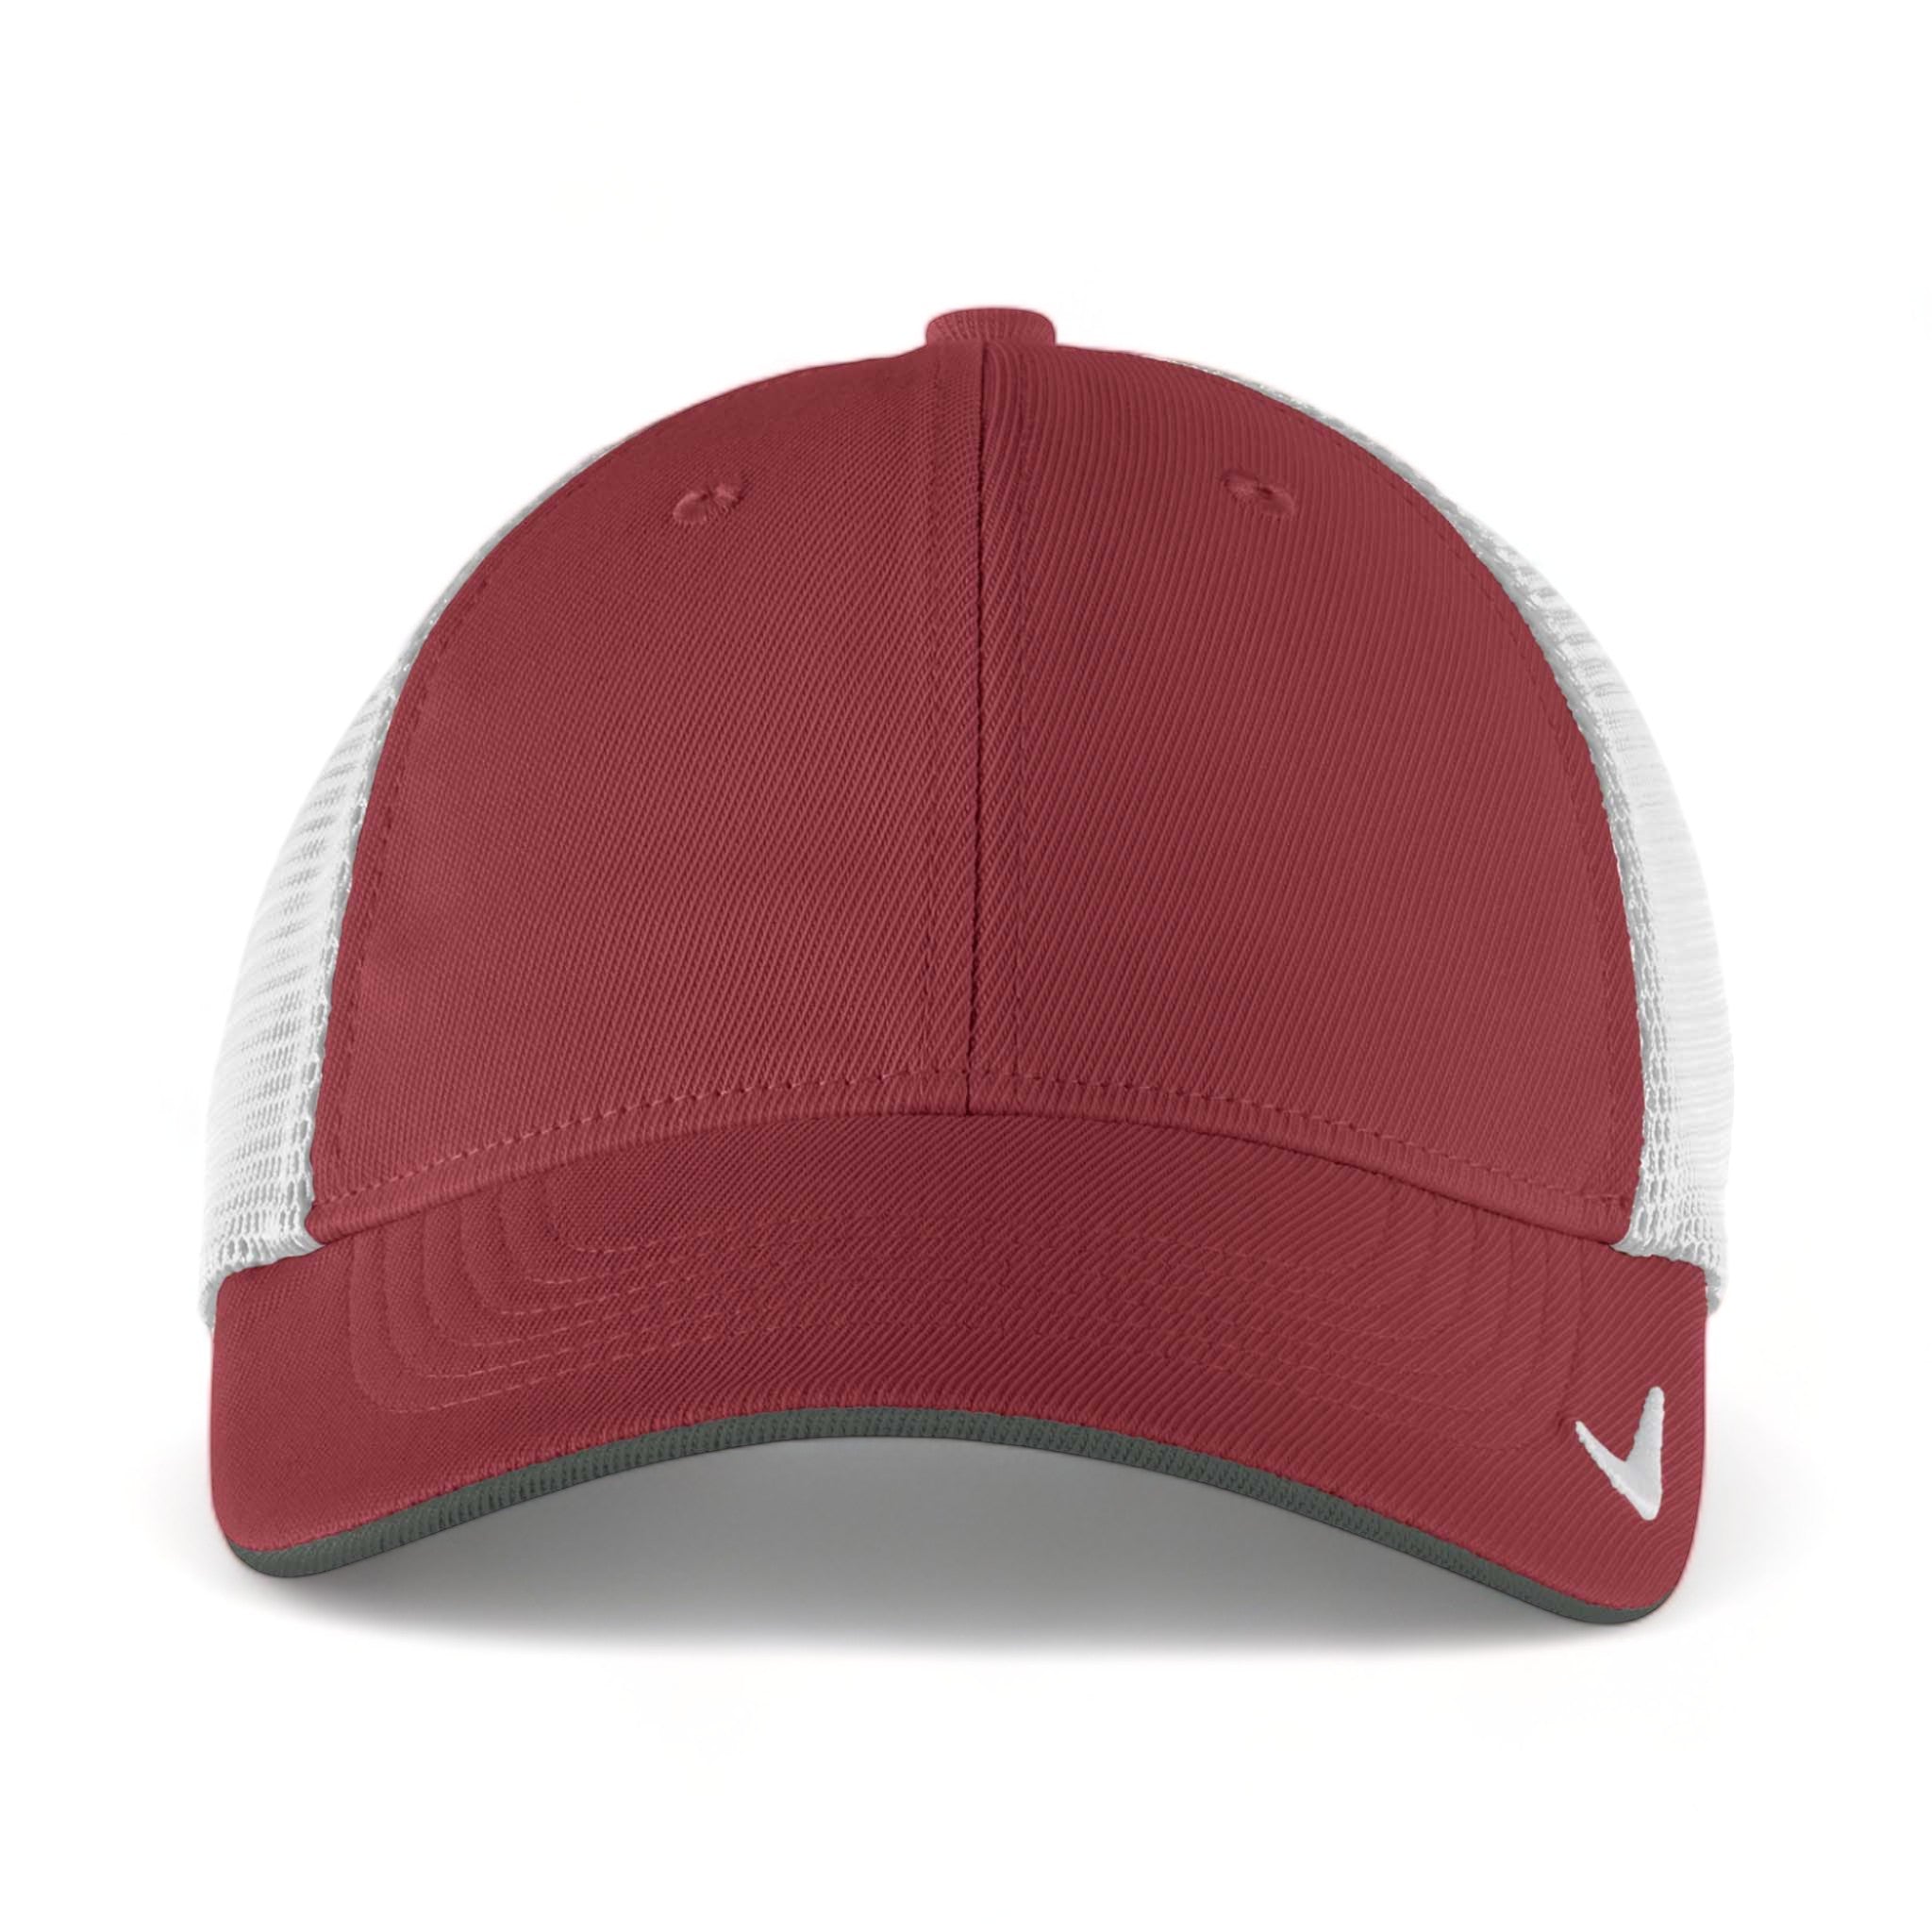 Front view of Nike NKFB6448 custom hat in team red and white